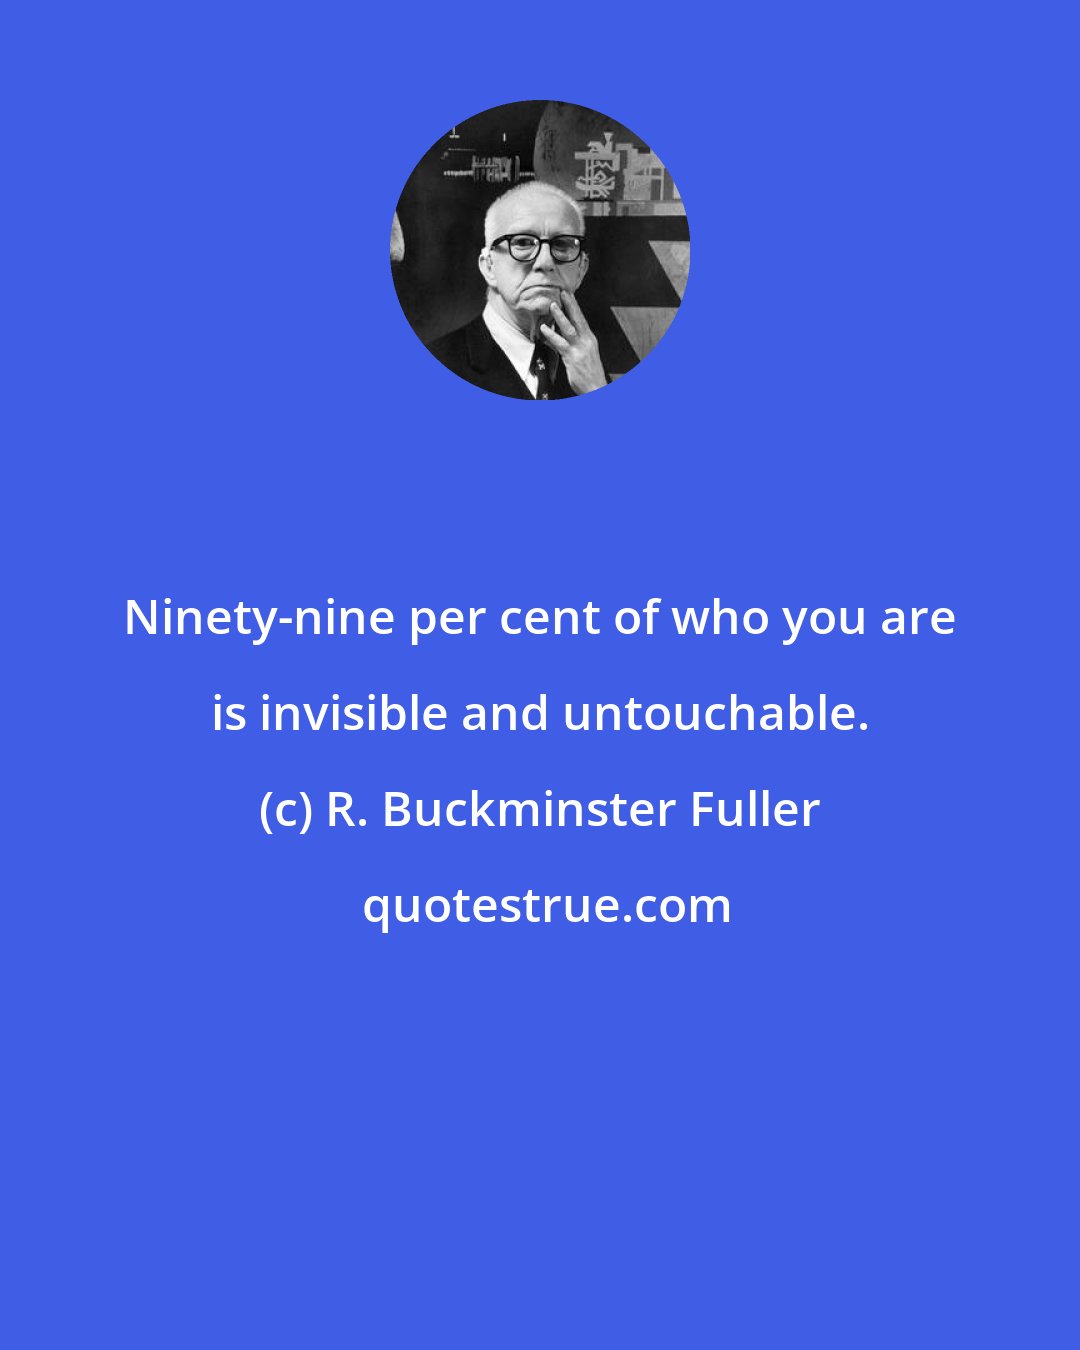 R. Buckminster Fuller: Ninety-nine per cent of who you are is invisible and untouchable.